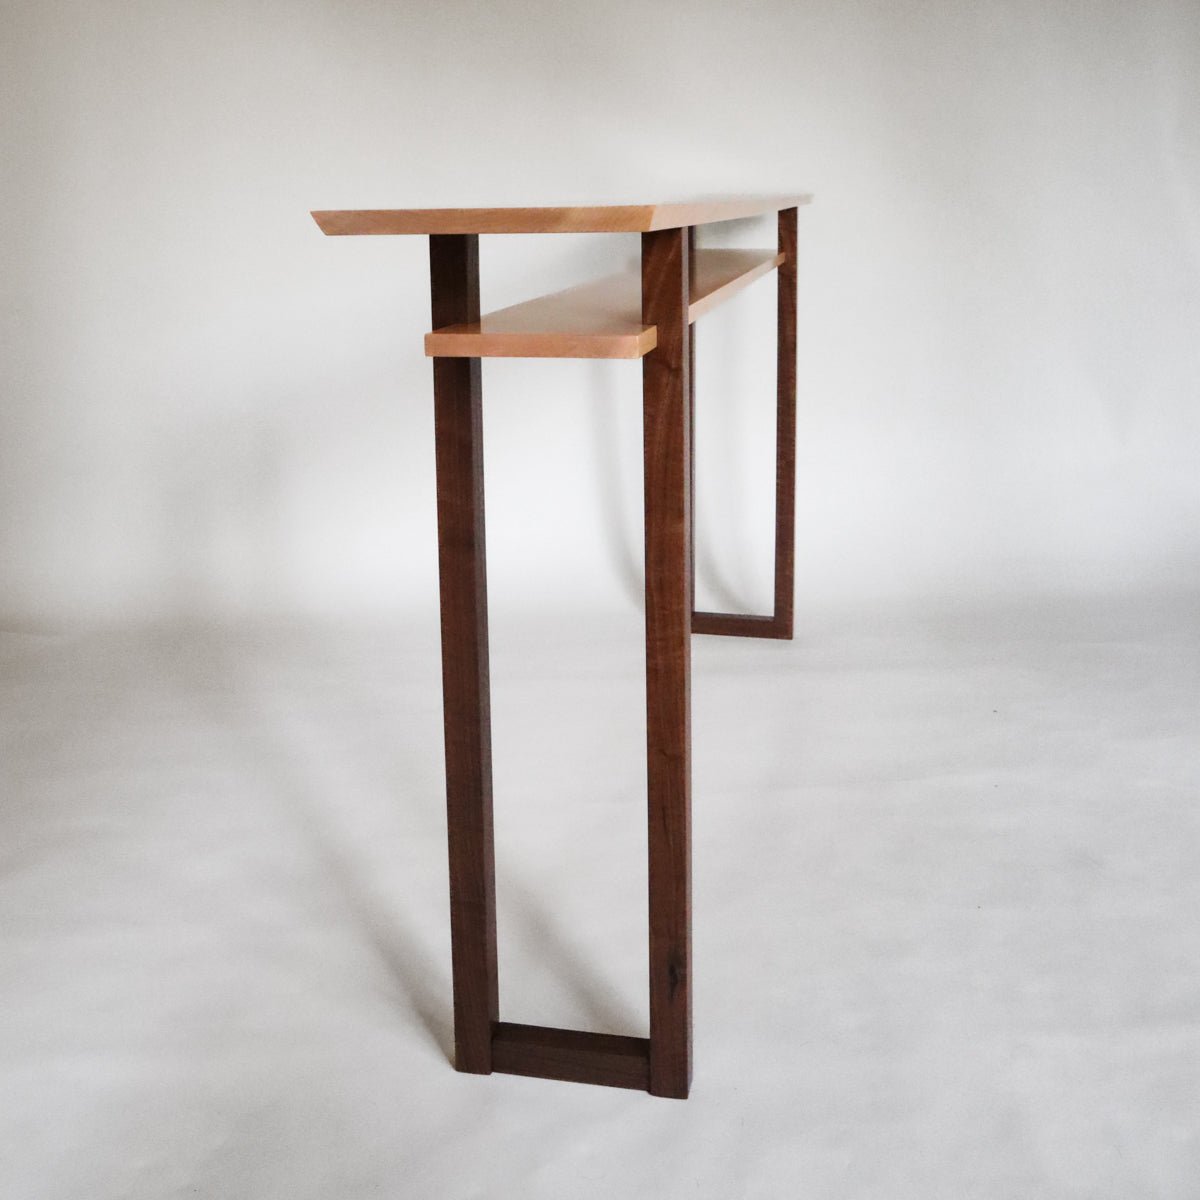 This is a narrow table for hallways hand-crafted by Mokuzai Furniture.